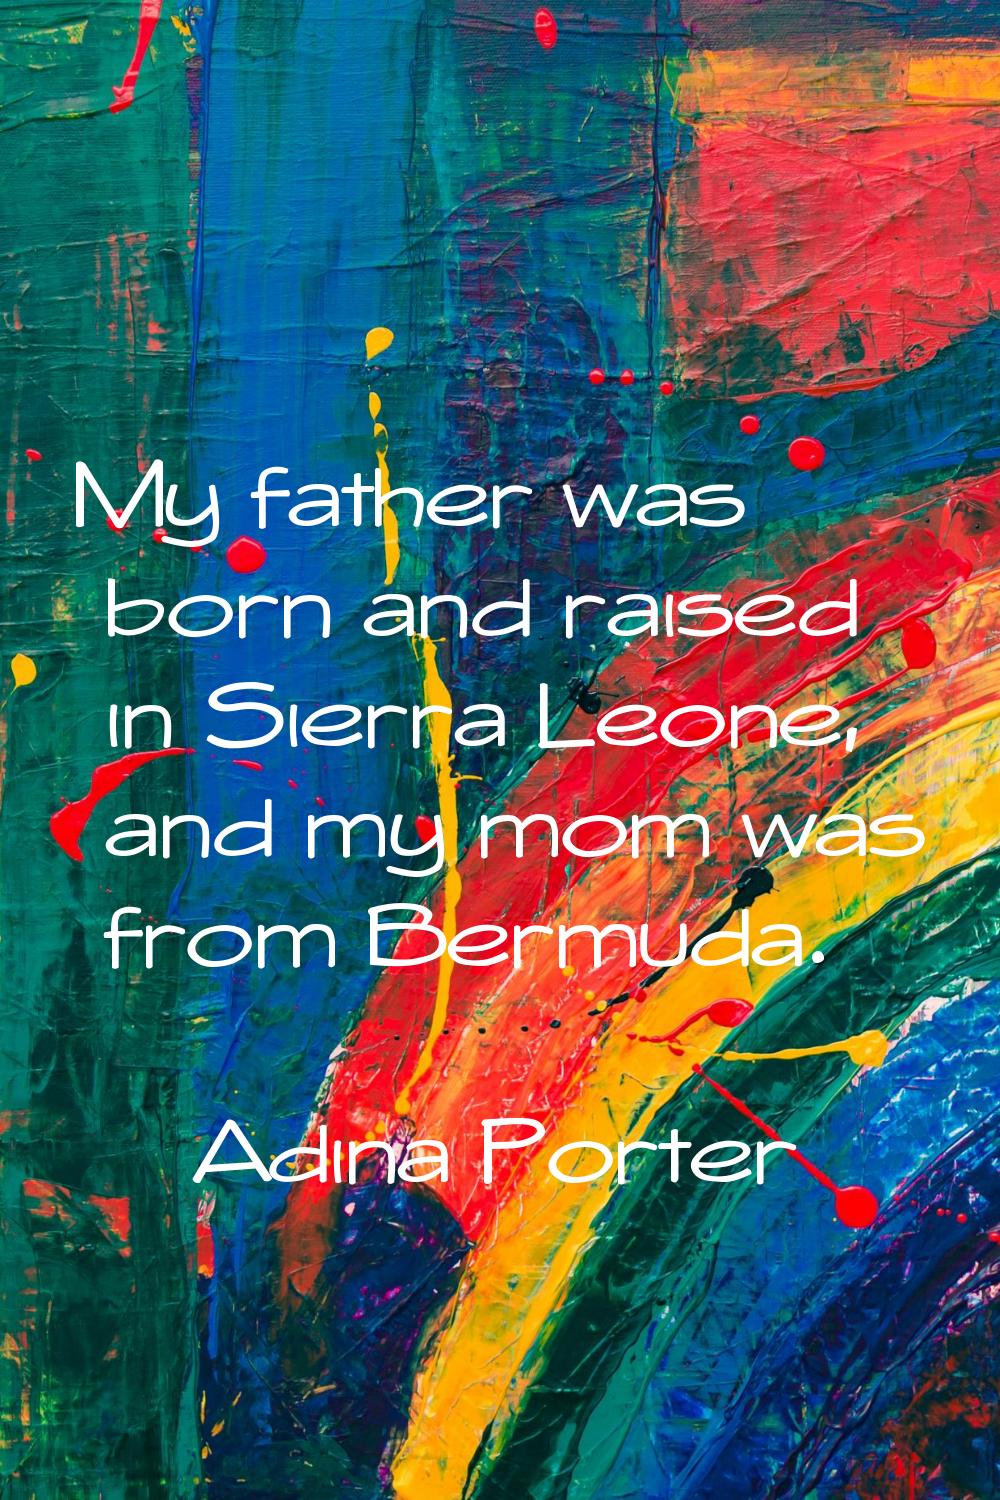 My father was born and raised in Sierra Leone, and my mom was from Bermuda.